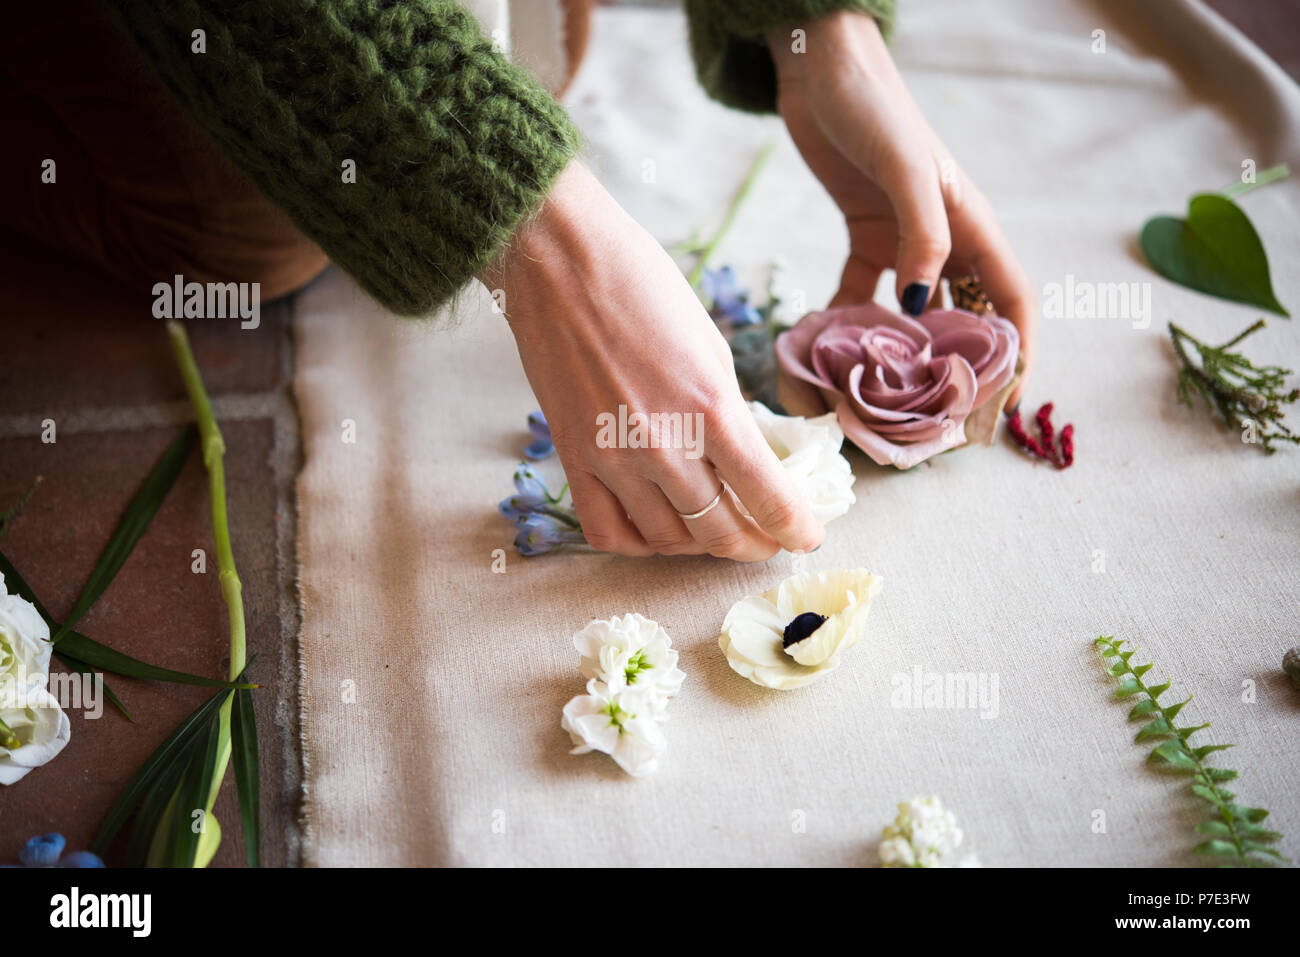 Woman arranging pastel flower heads and leaf stems on textile, detail of hands Stock Photo